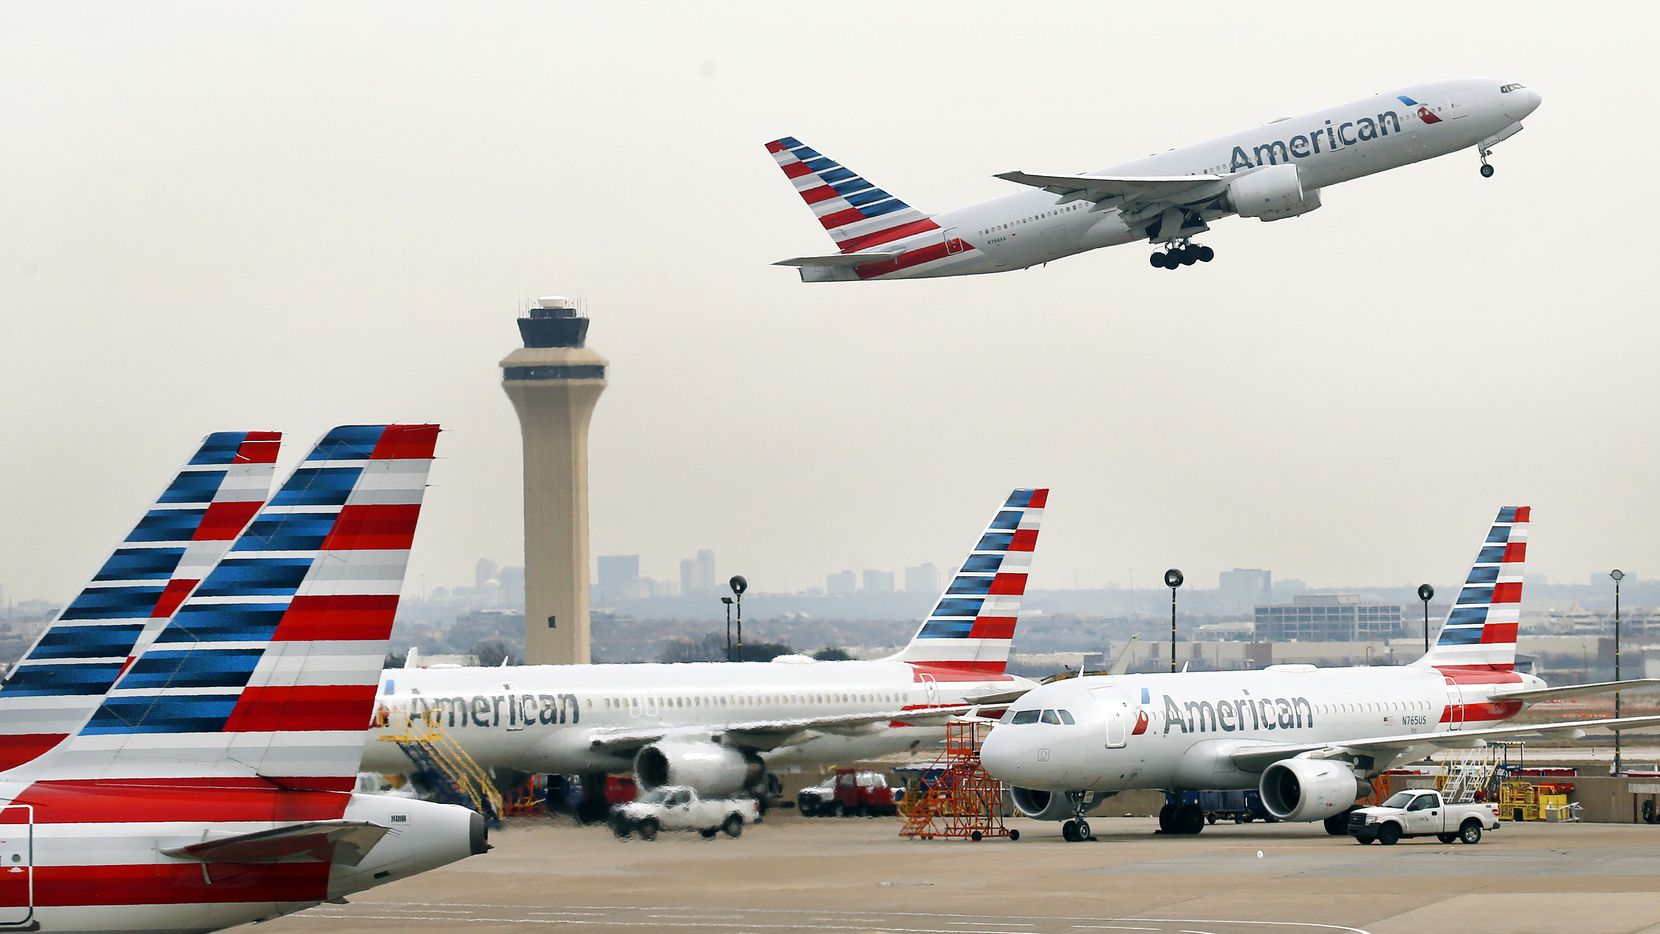 American Airlines Goes $2.2 Billion Loss In Corona Pandemic